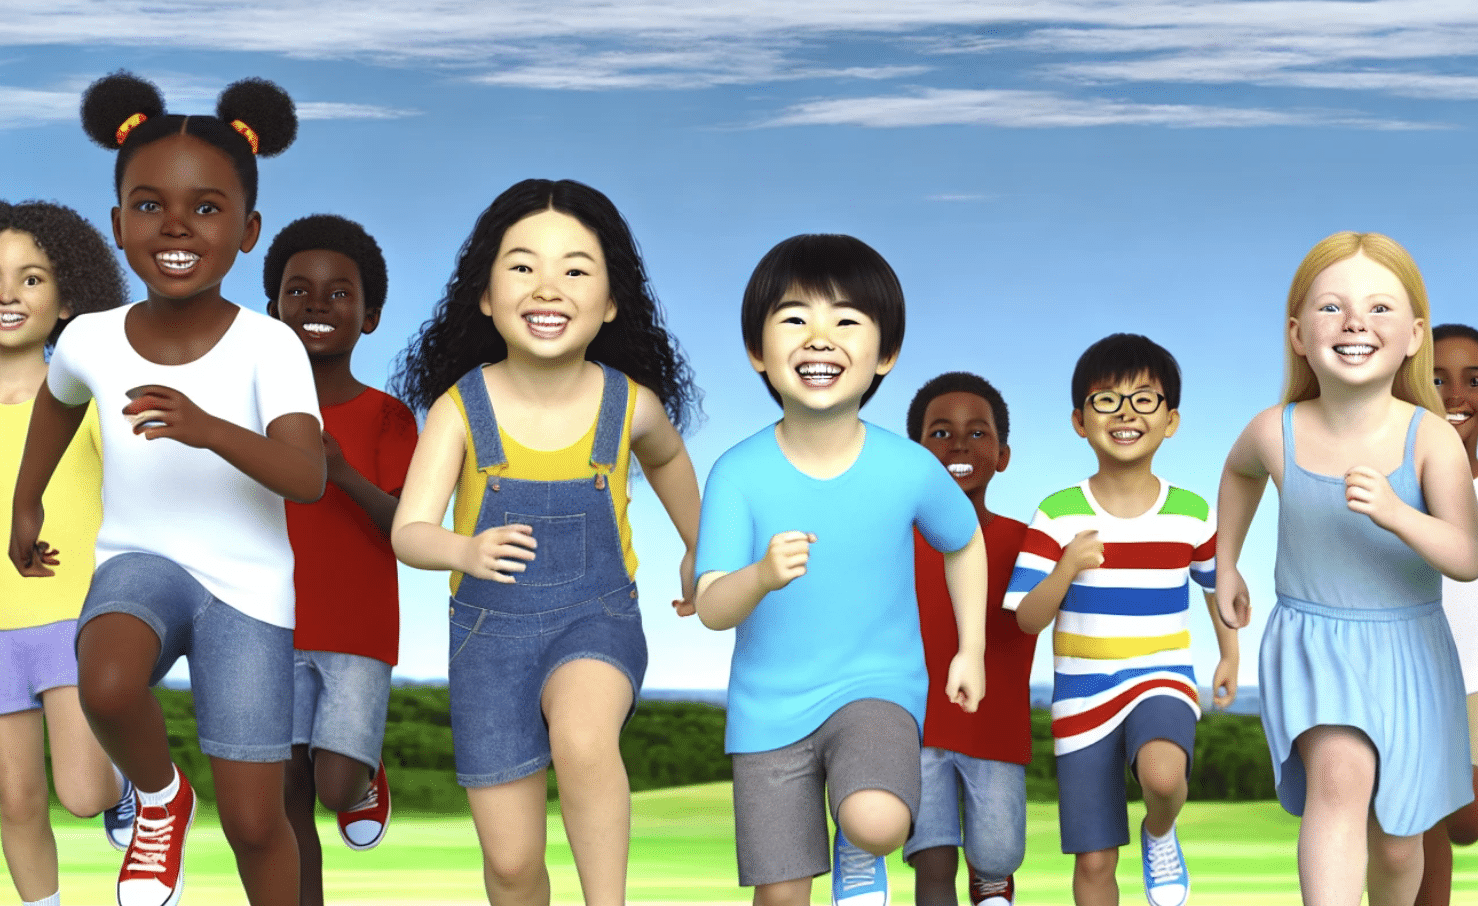 AI generated image of ethnically diverse children smiling and running forward